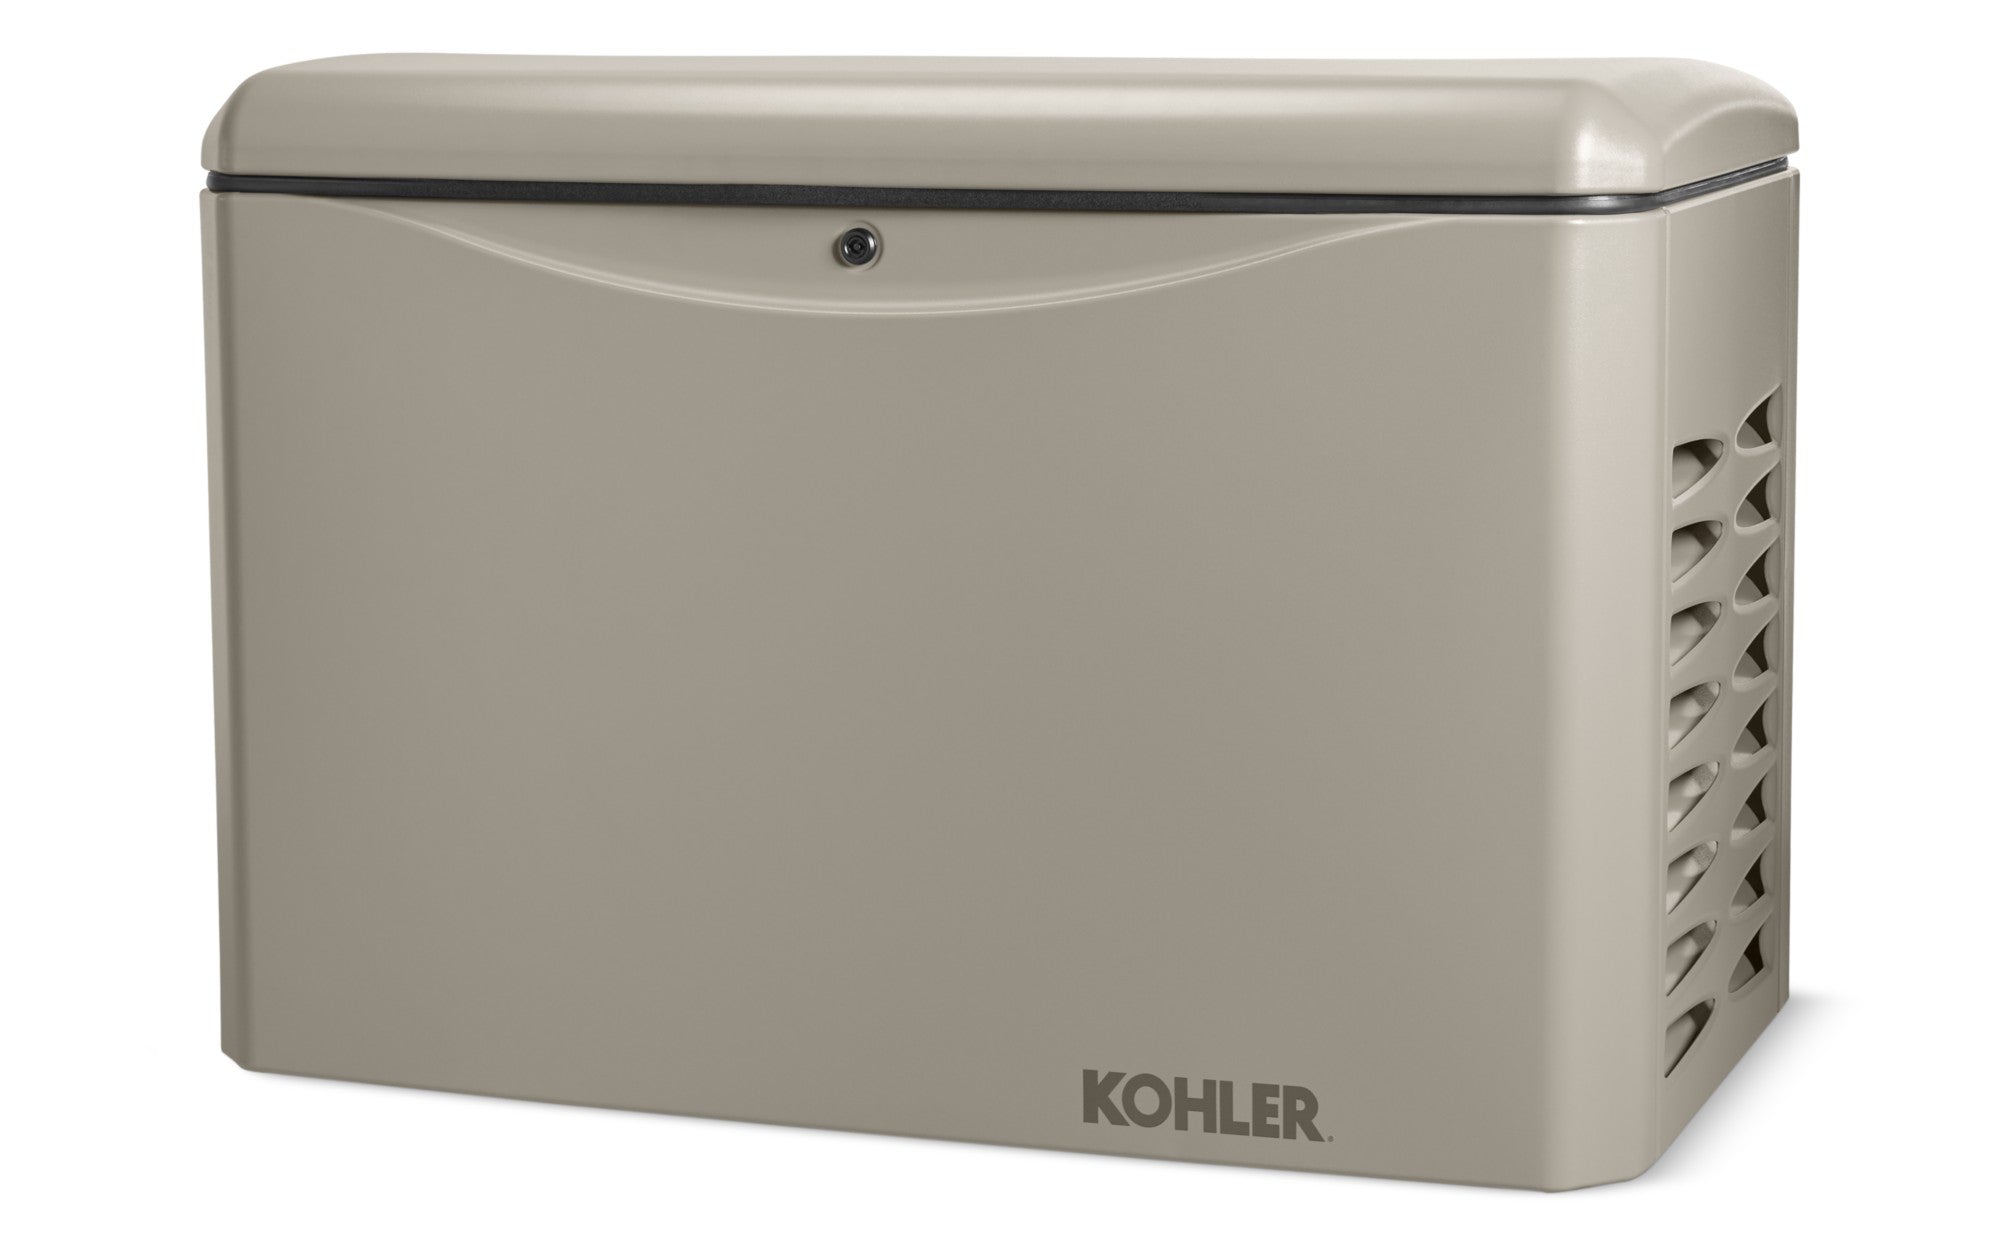 Kohler 26RCA-QS50 Standby Generator 26KW 120/240V Single Phase with Cold Weather Kit New